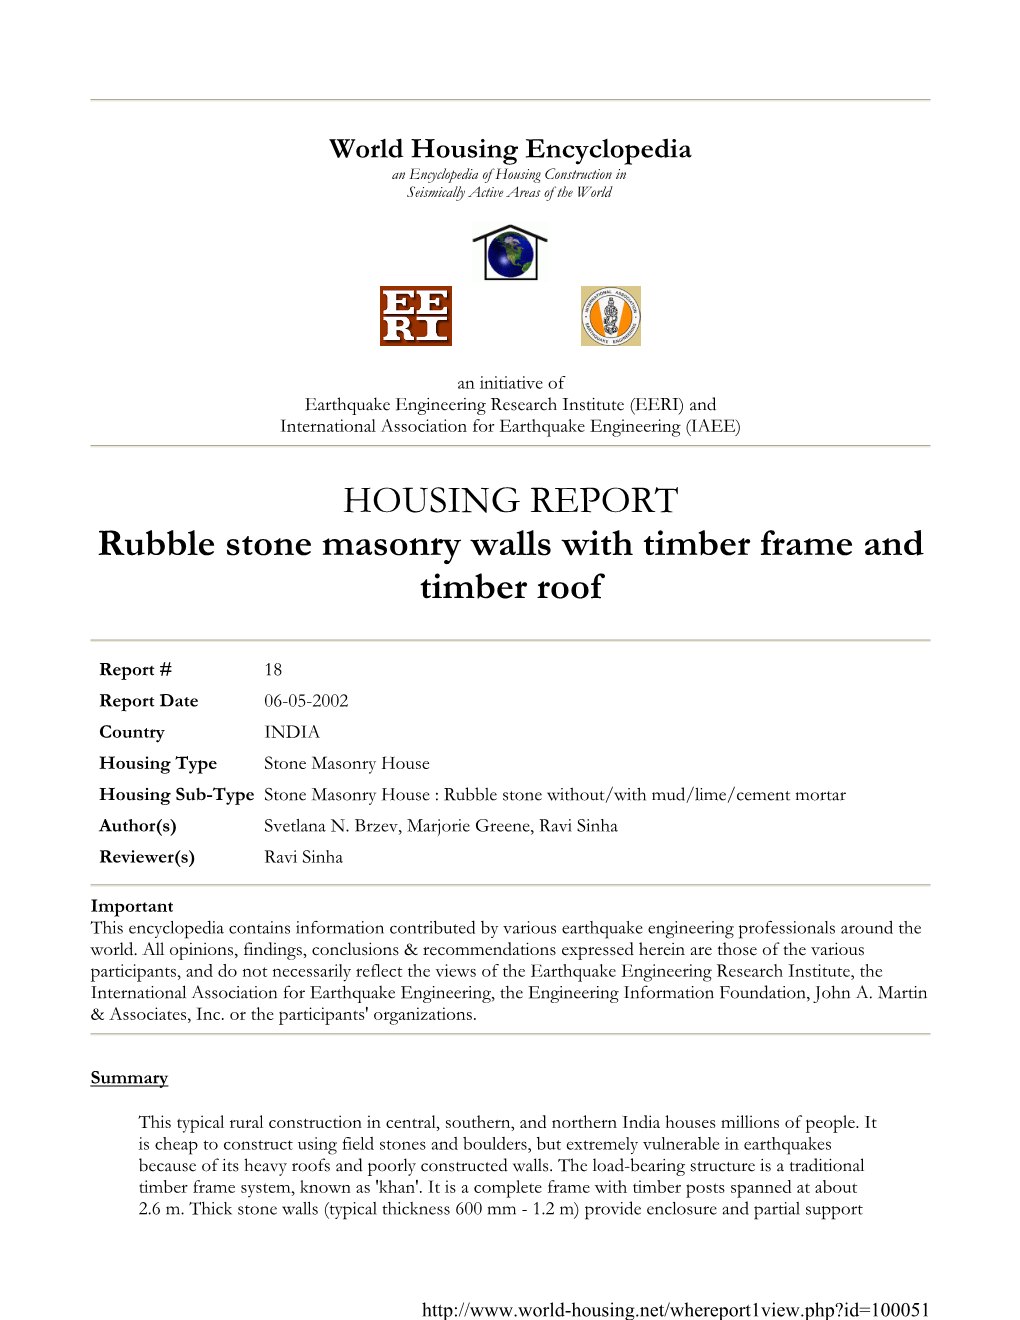 HOUSING REPORT Rubble Stone Masonry Walls with Timber Frame and Timber Roof